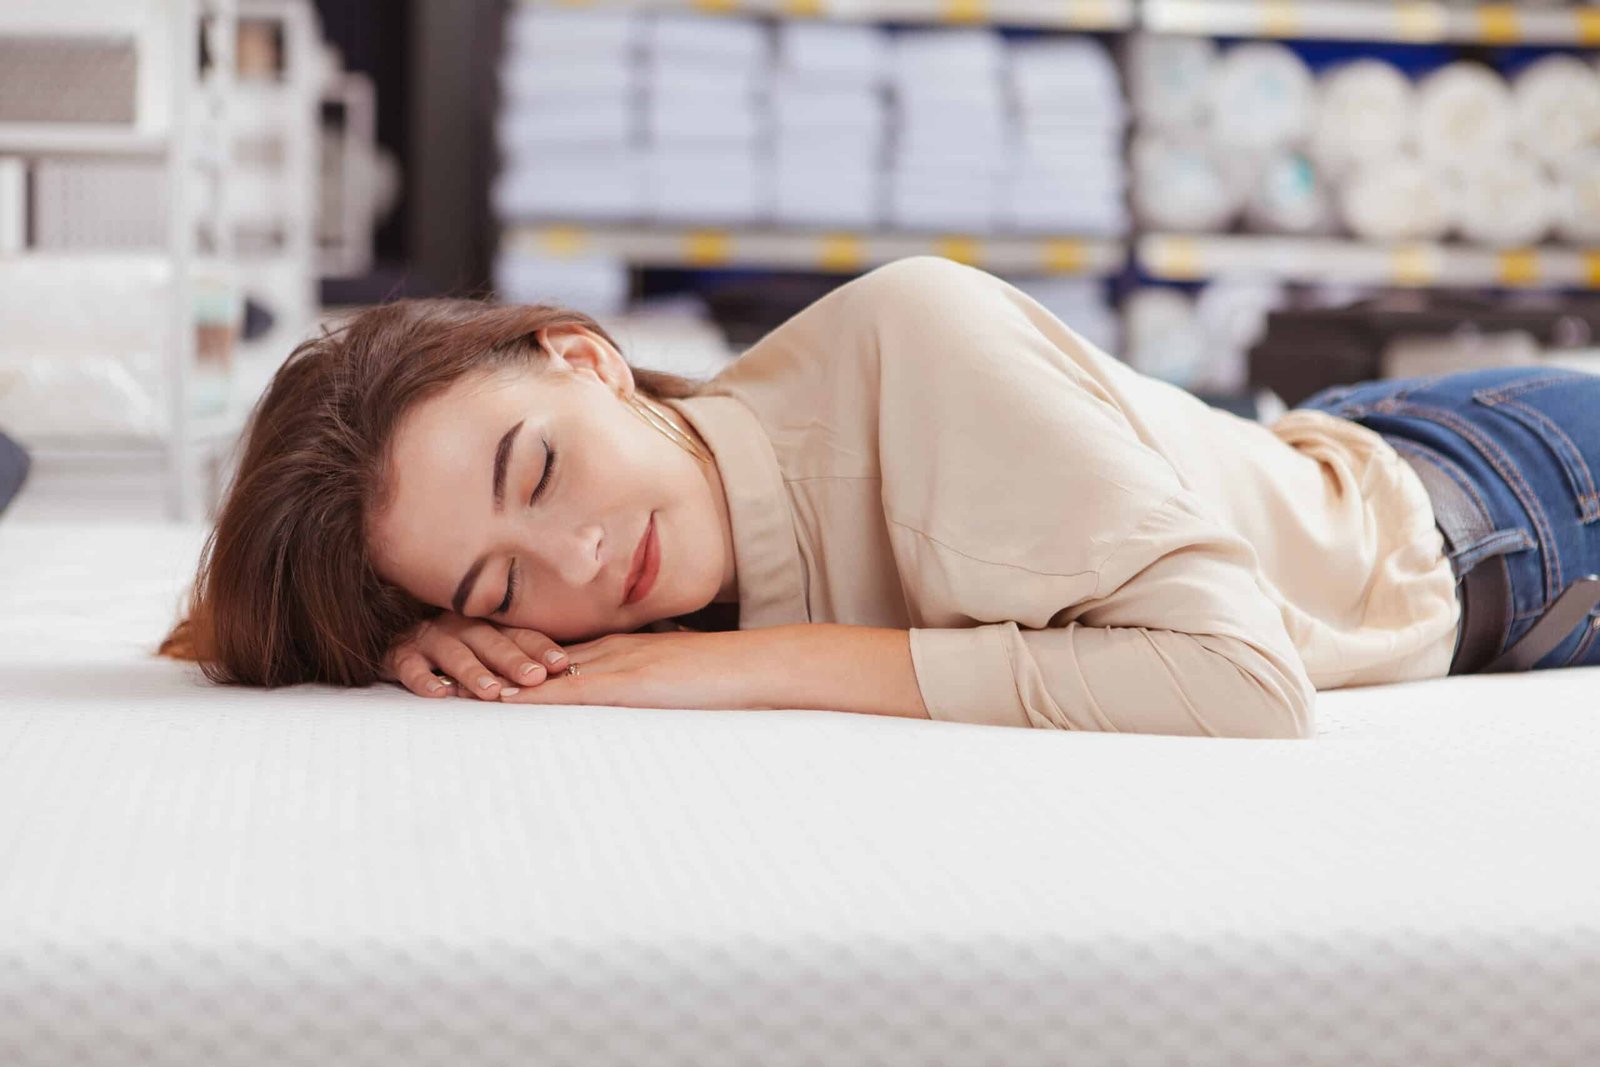 Mattress Warranties: What's Covered and What's Not